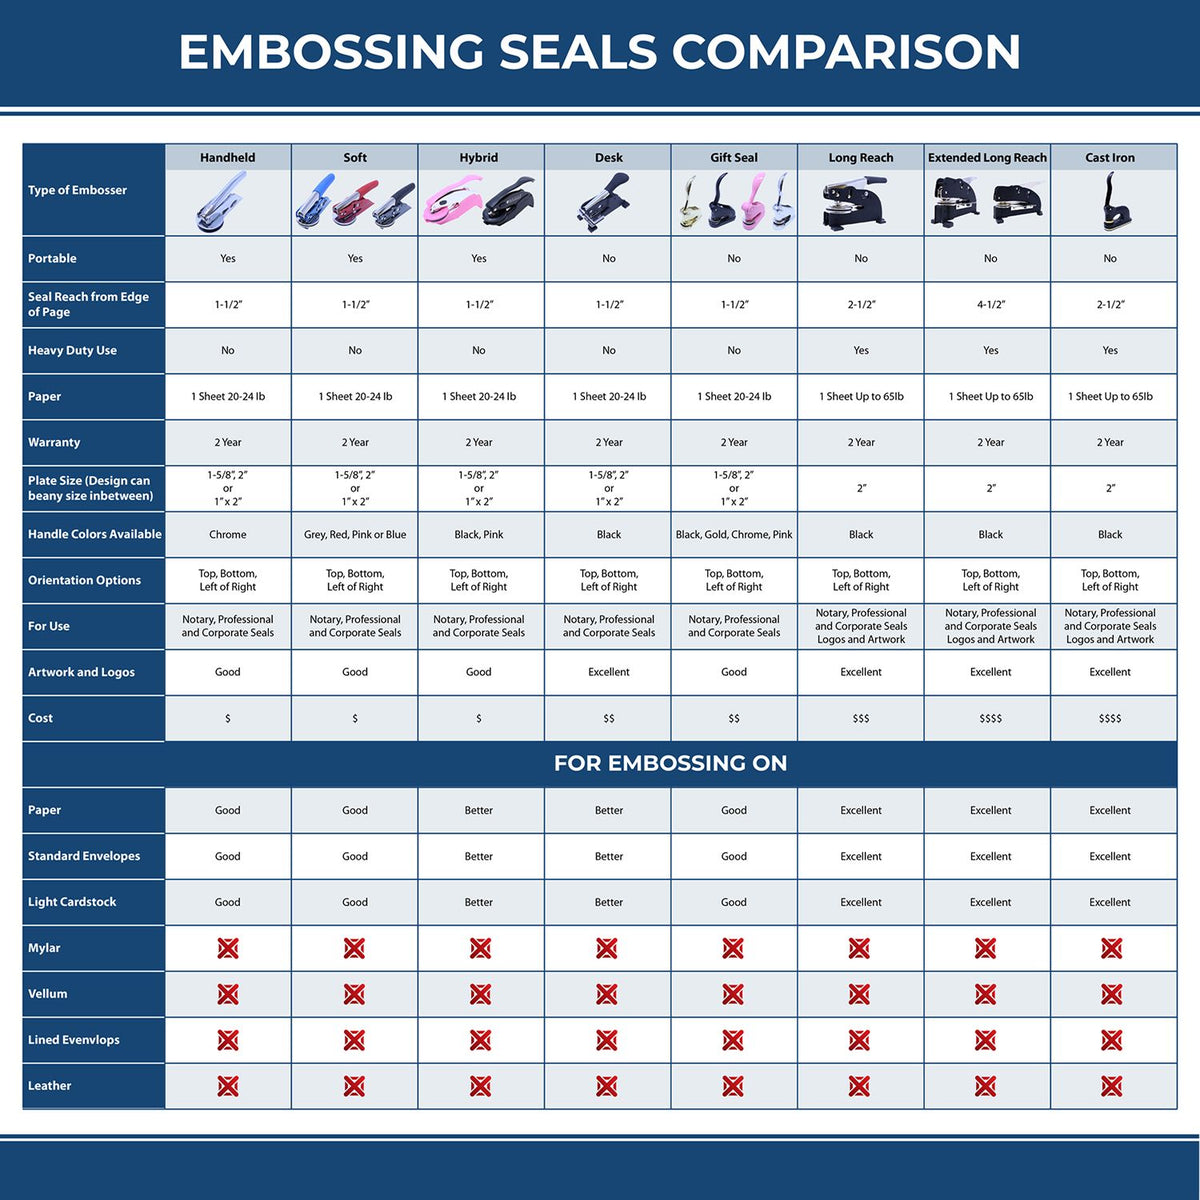 A comparison chart for the different types of mount models available for the State of Missouri Extended Long Reach Geologist Seal